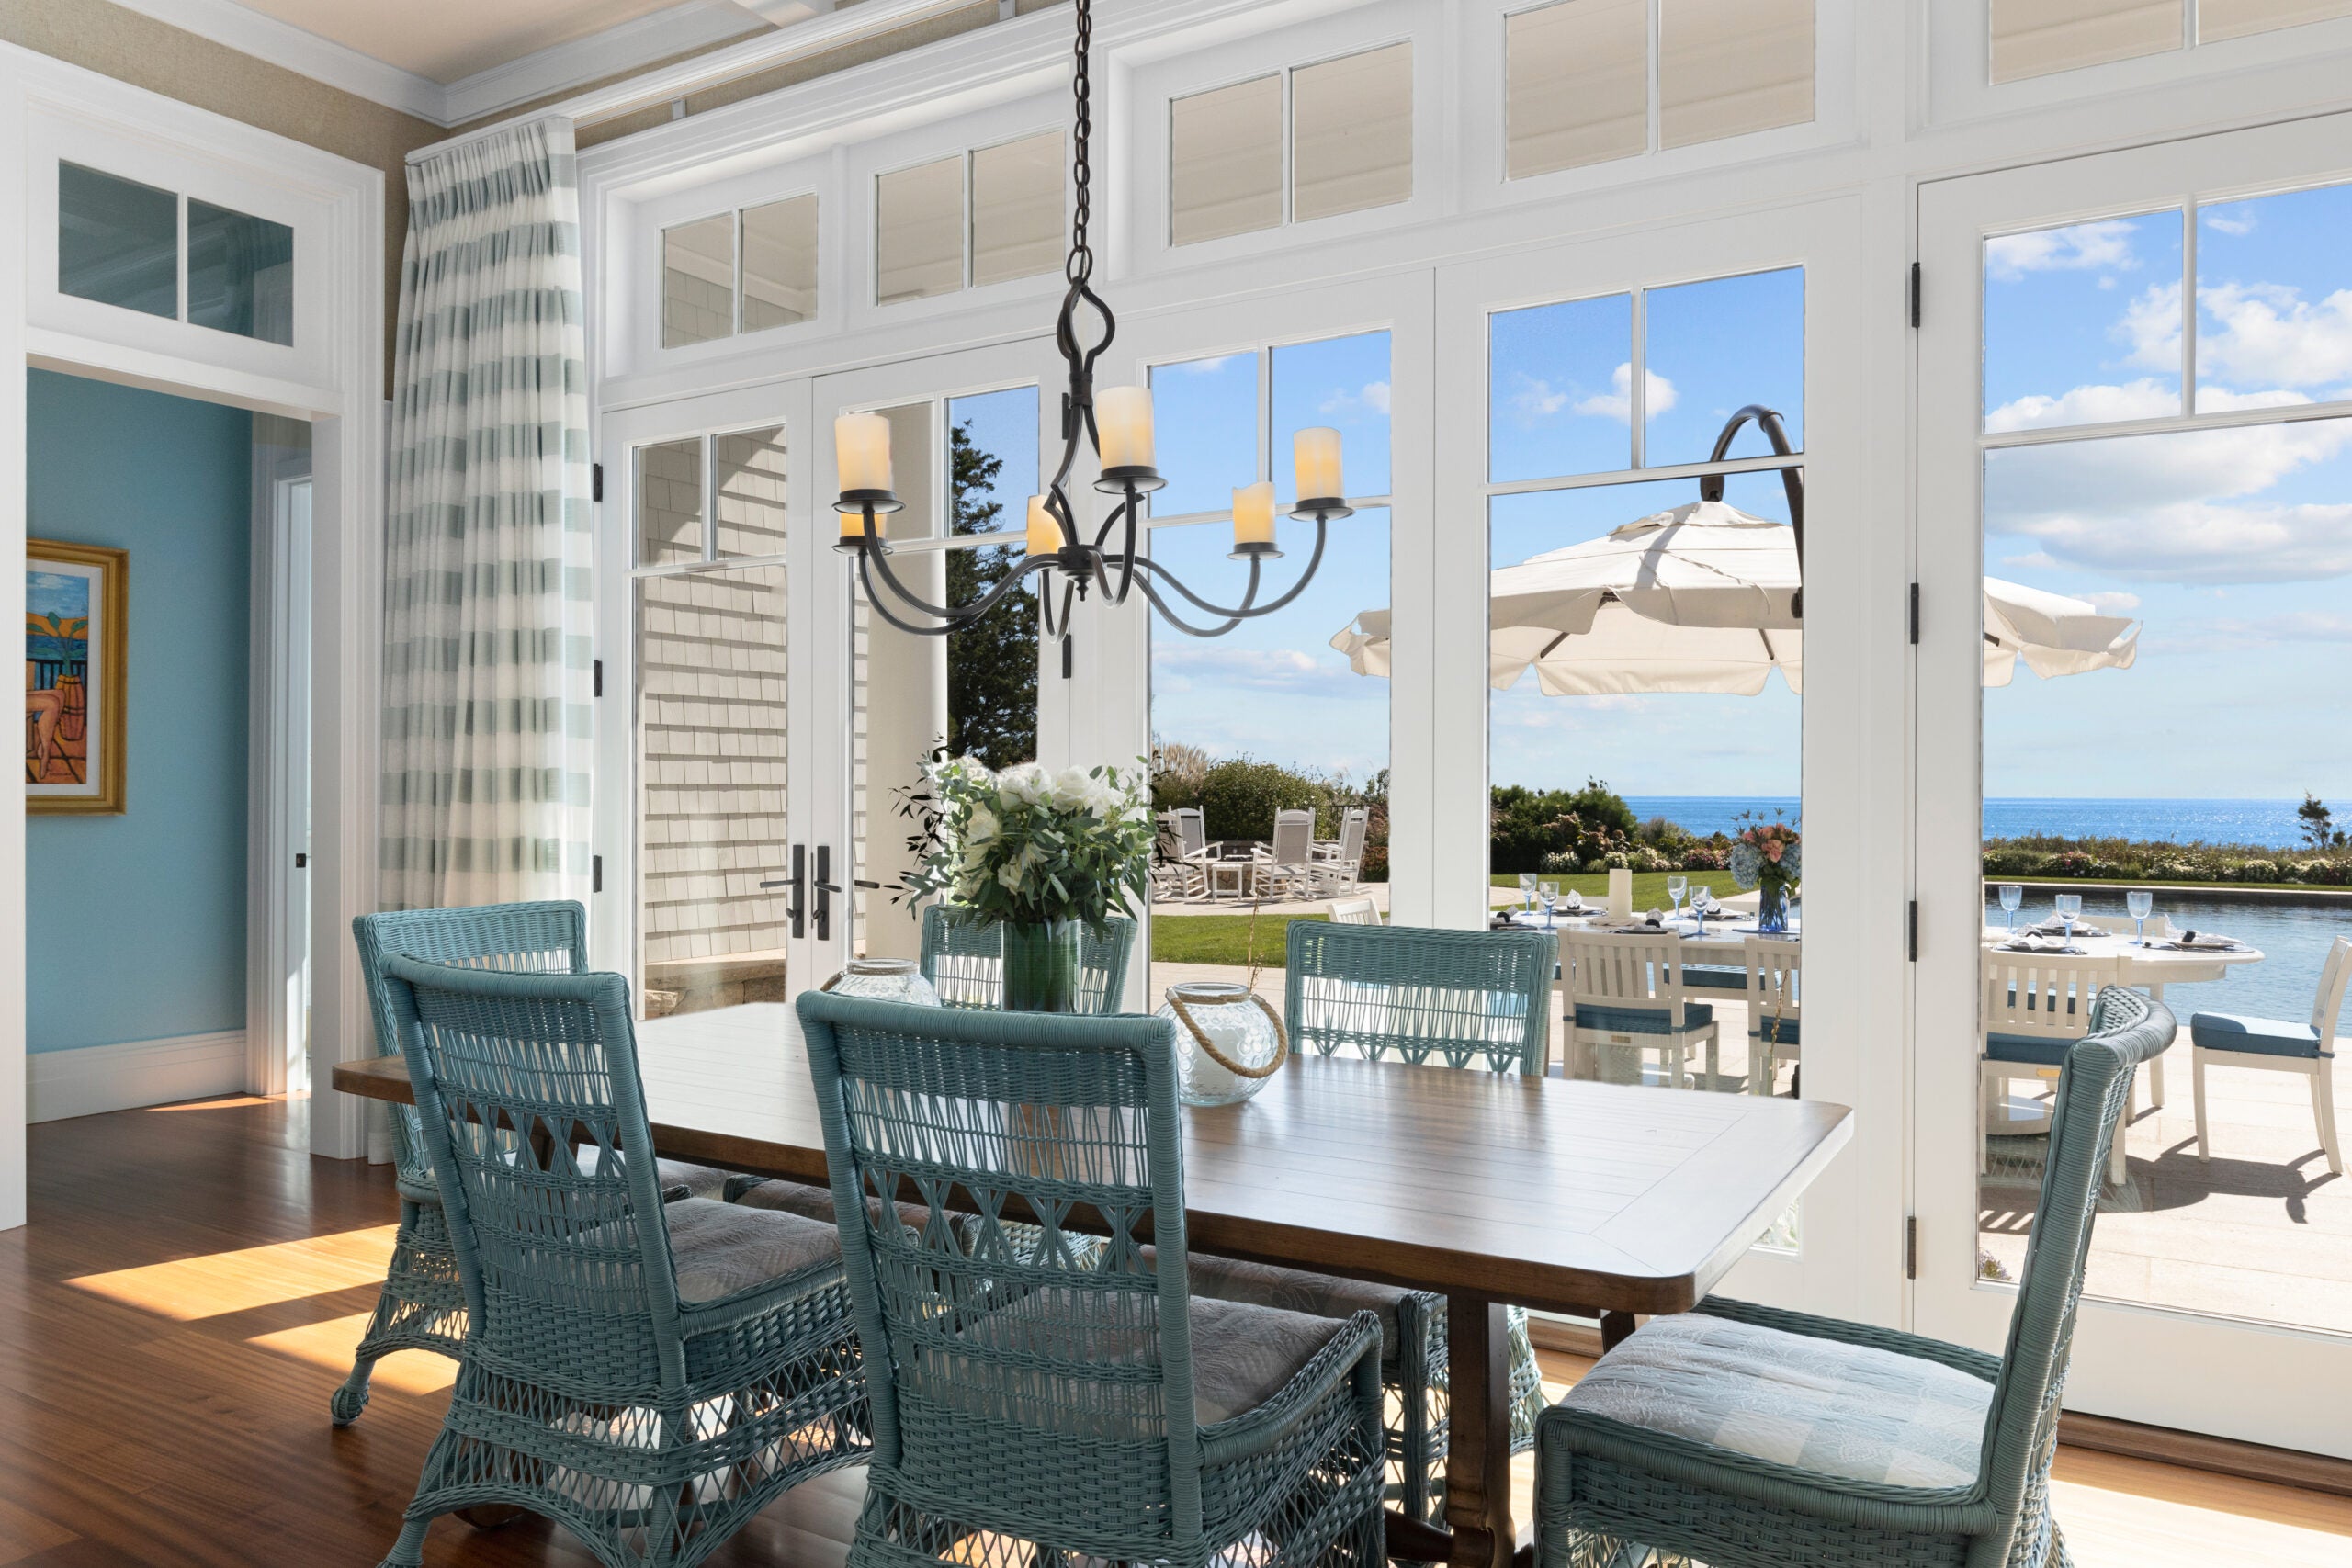 A close-up of the view from the dining area with the blue wicker chairs.